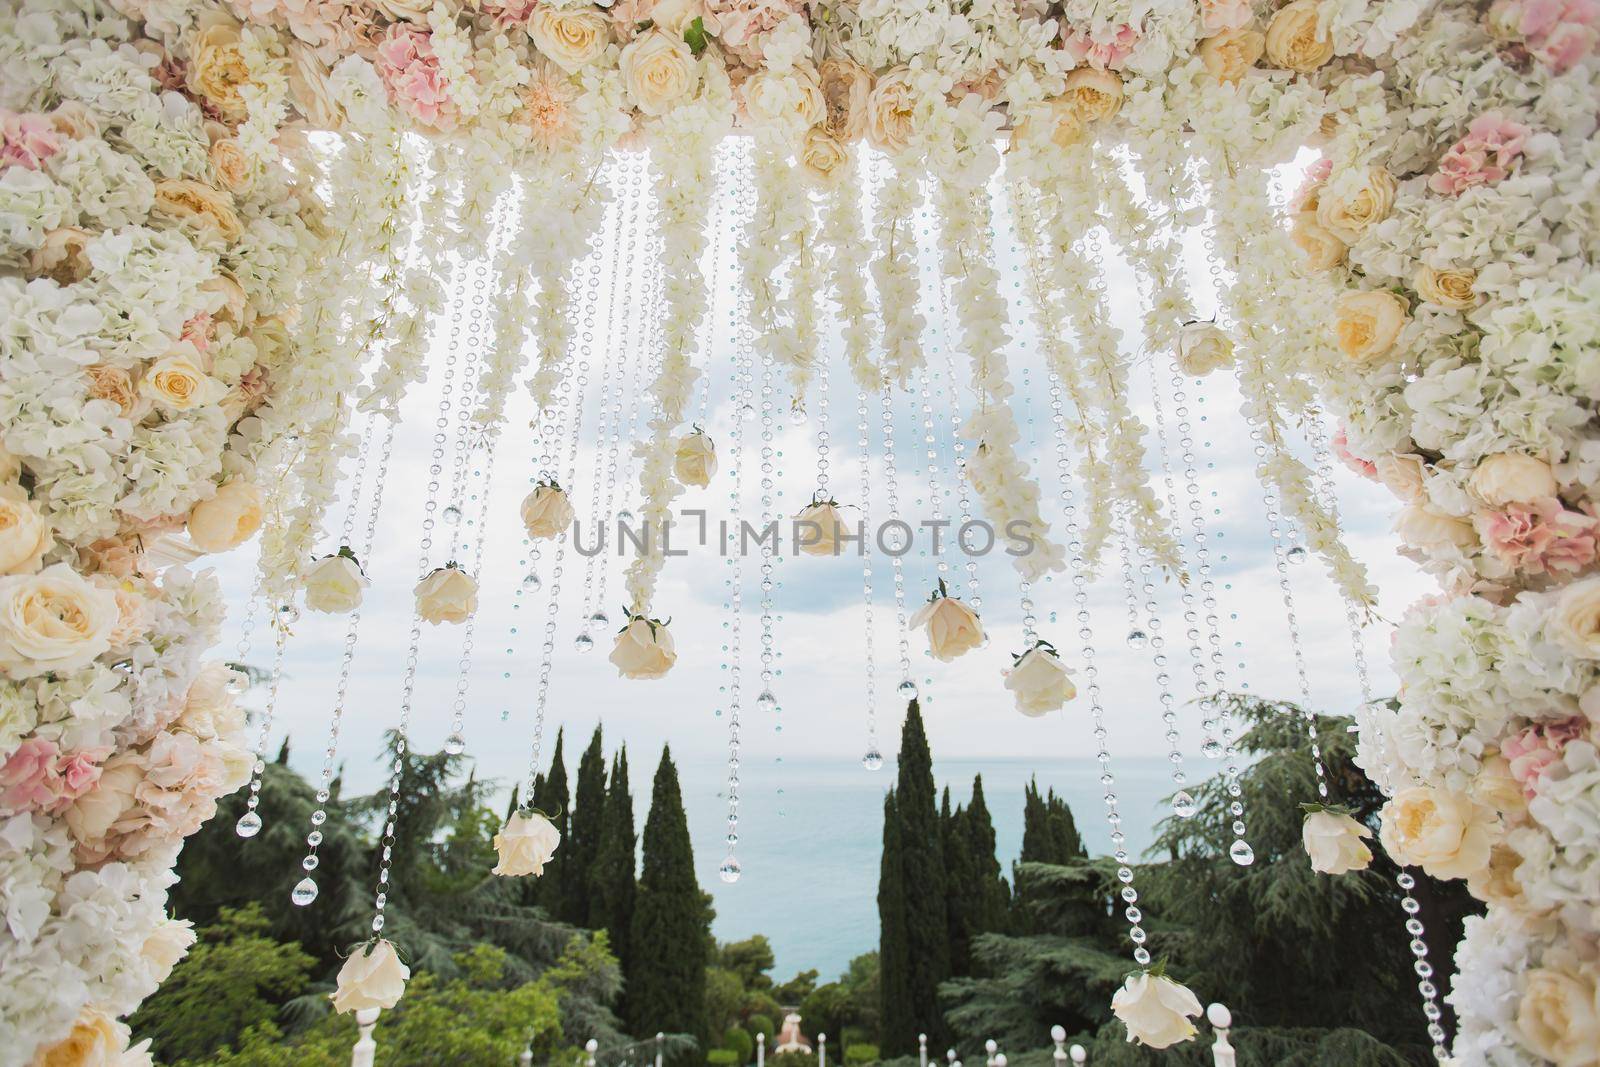 Wedding arch with flowers and beads on blue sky background close-up.